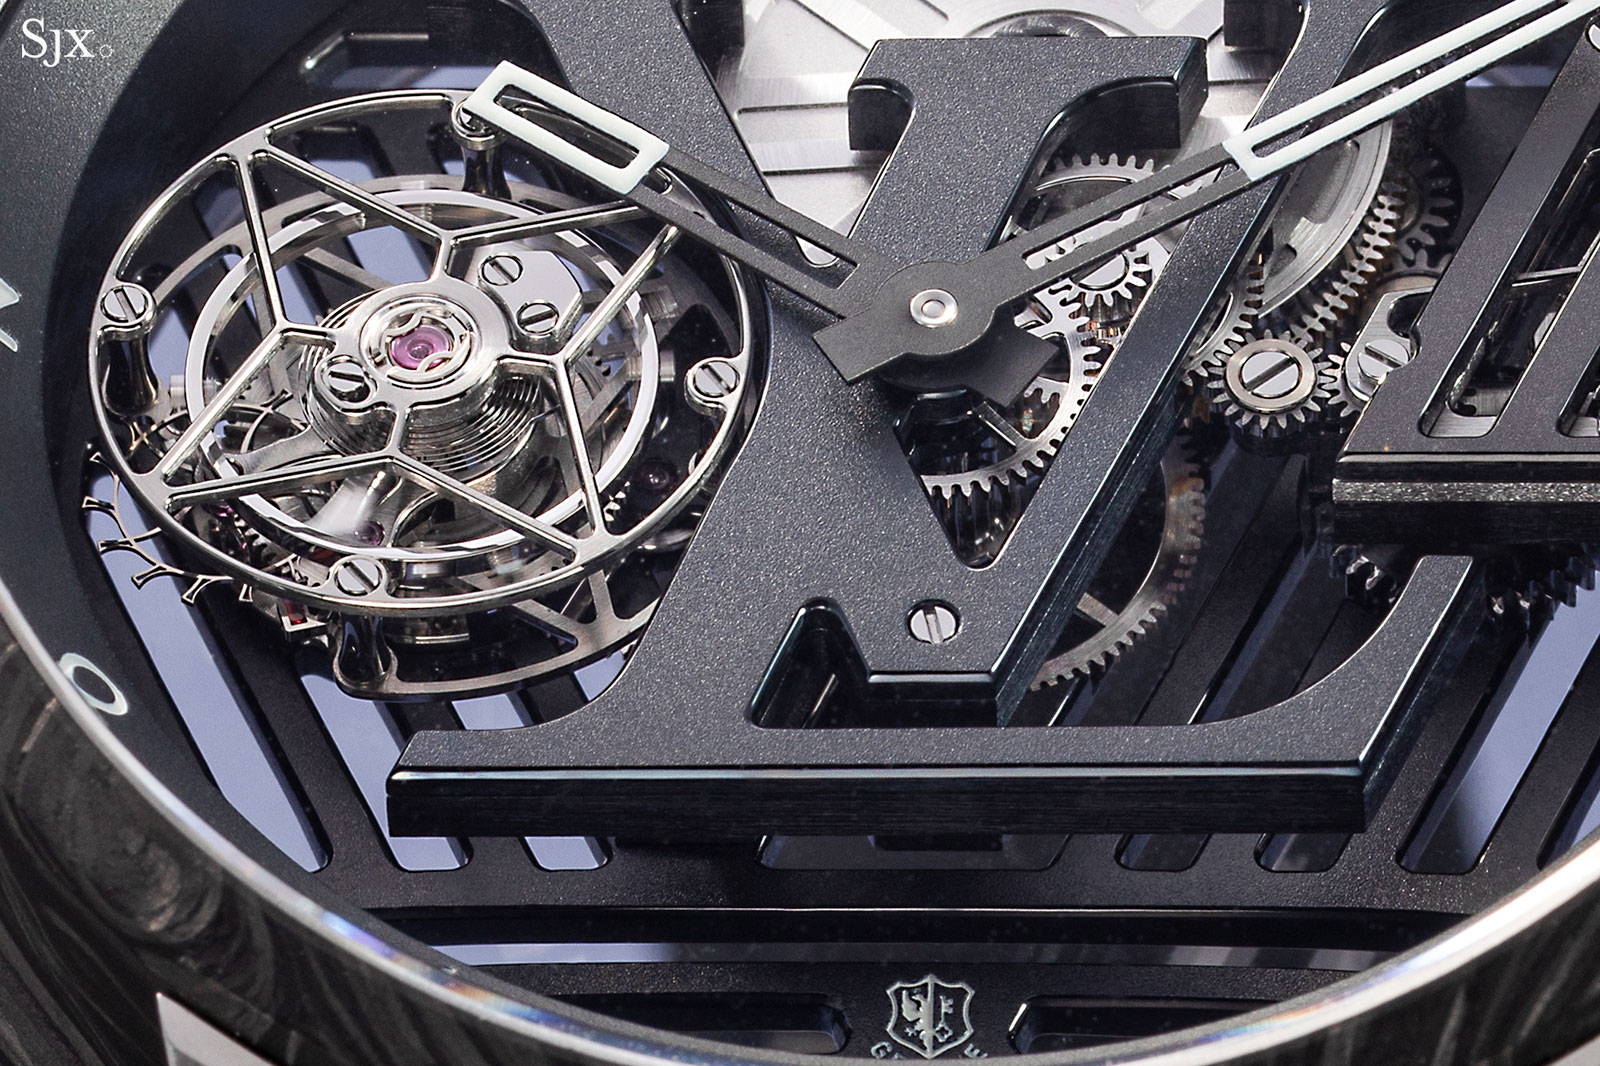 Louis Vuitton Introduces the Watch Trunk in Titanium and Ruthenium